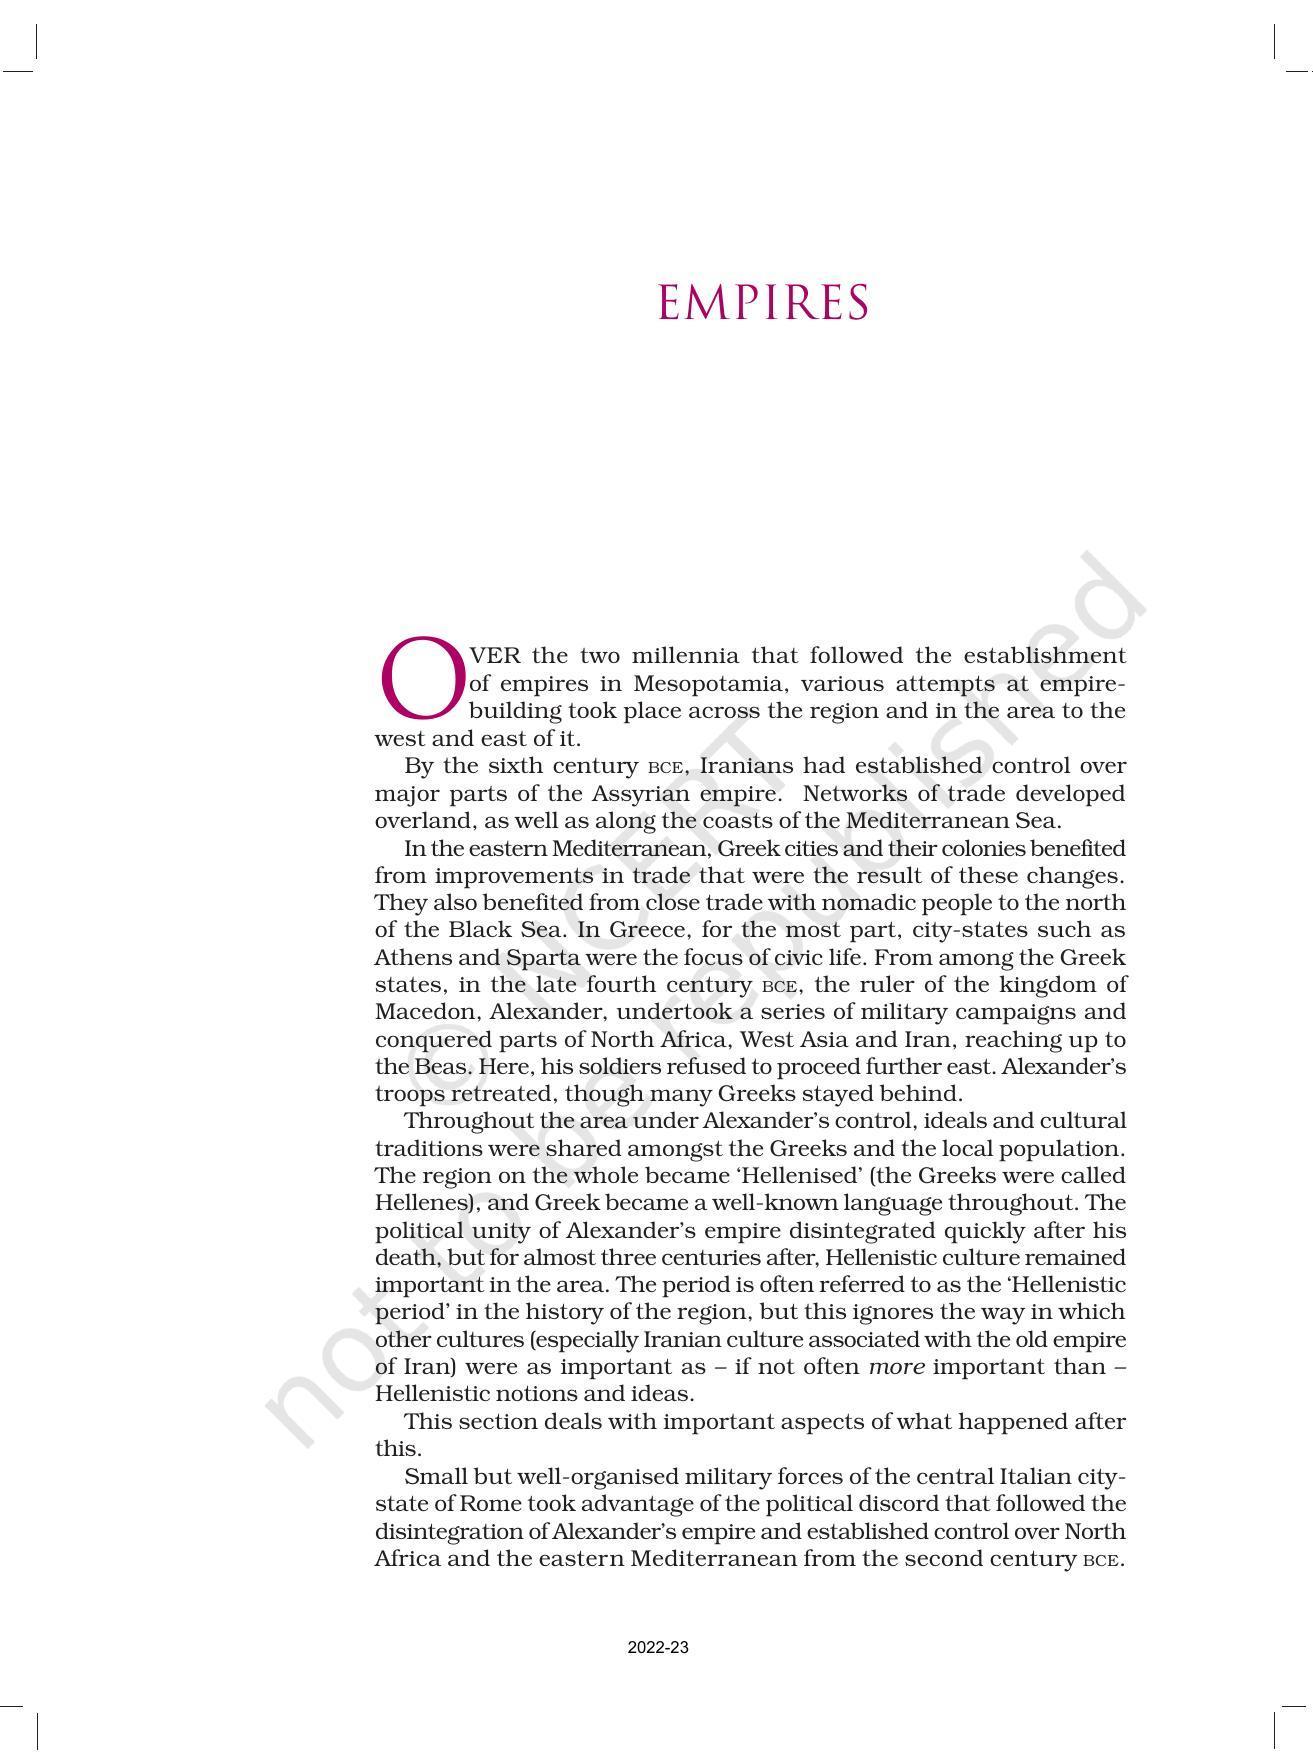 NCERT Book for Class 11 History Chapter 3 An Empire Across Three Continents - Page 2